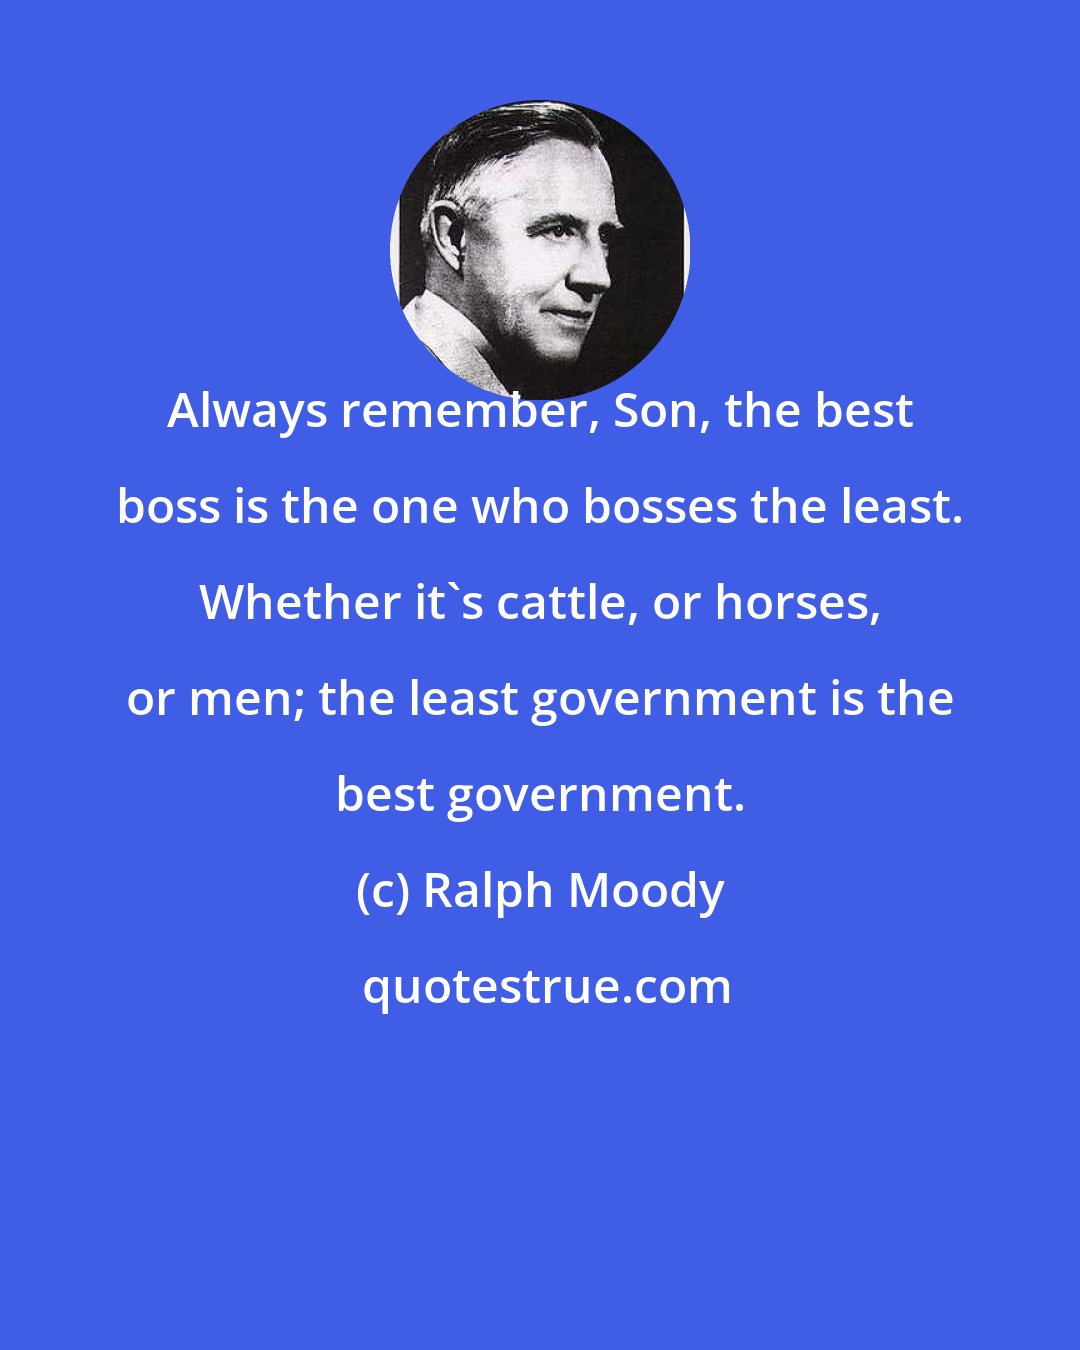 Ralph Moody: Always remember, Son, the best boss is the one who bosses the least. Whether it's cattle, or horses, or men; the least government is the best government.